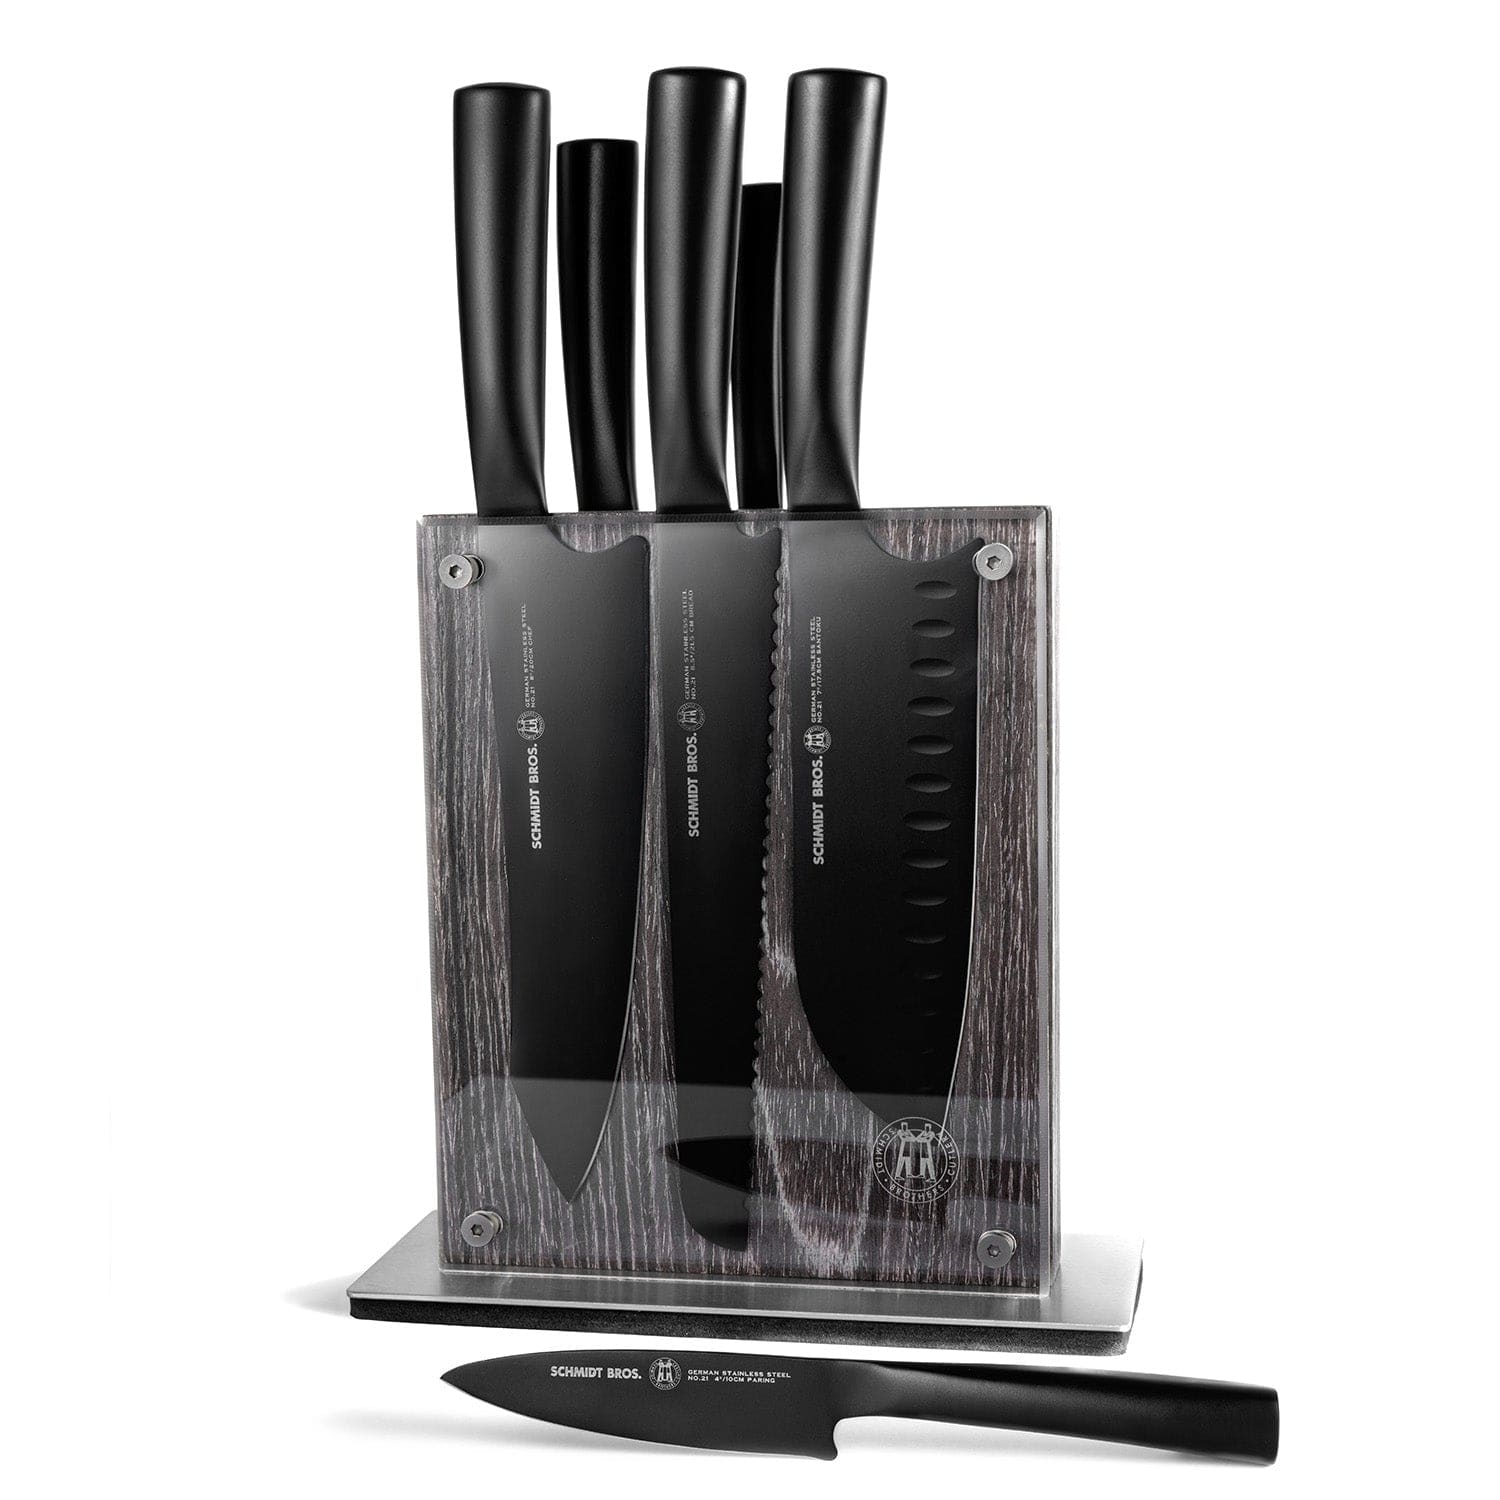 MIDONE Knife Set, 7 Pcs Stainless Steel Kitchen Knife Set, with